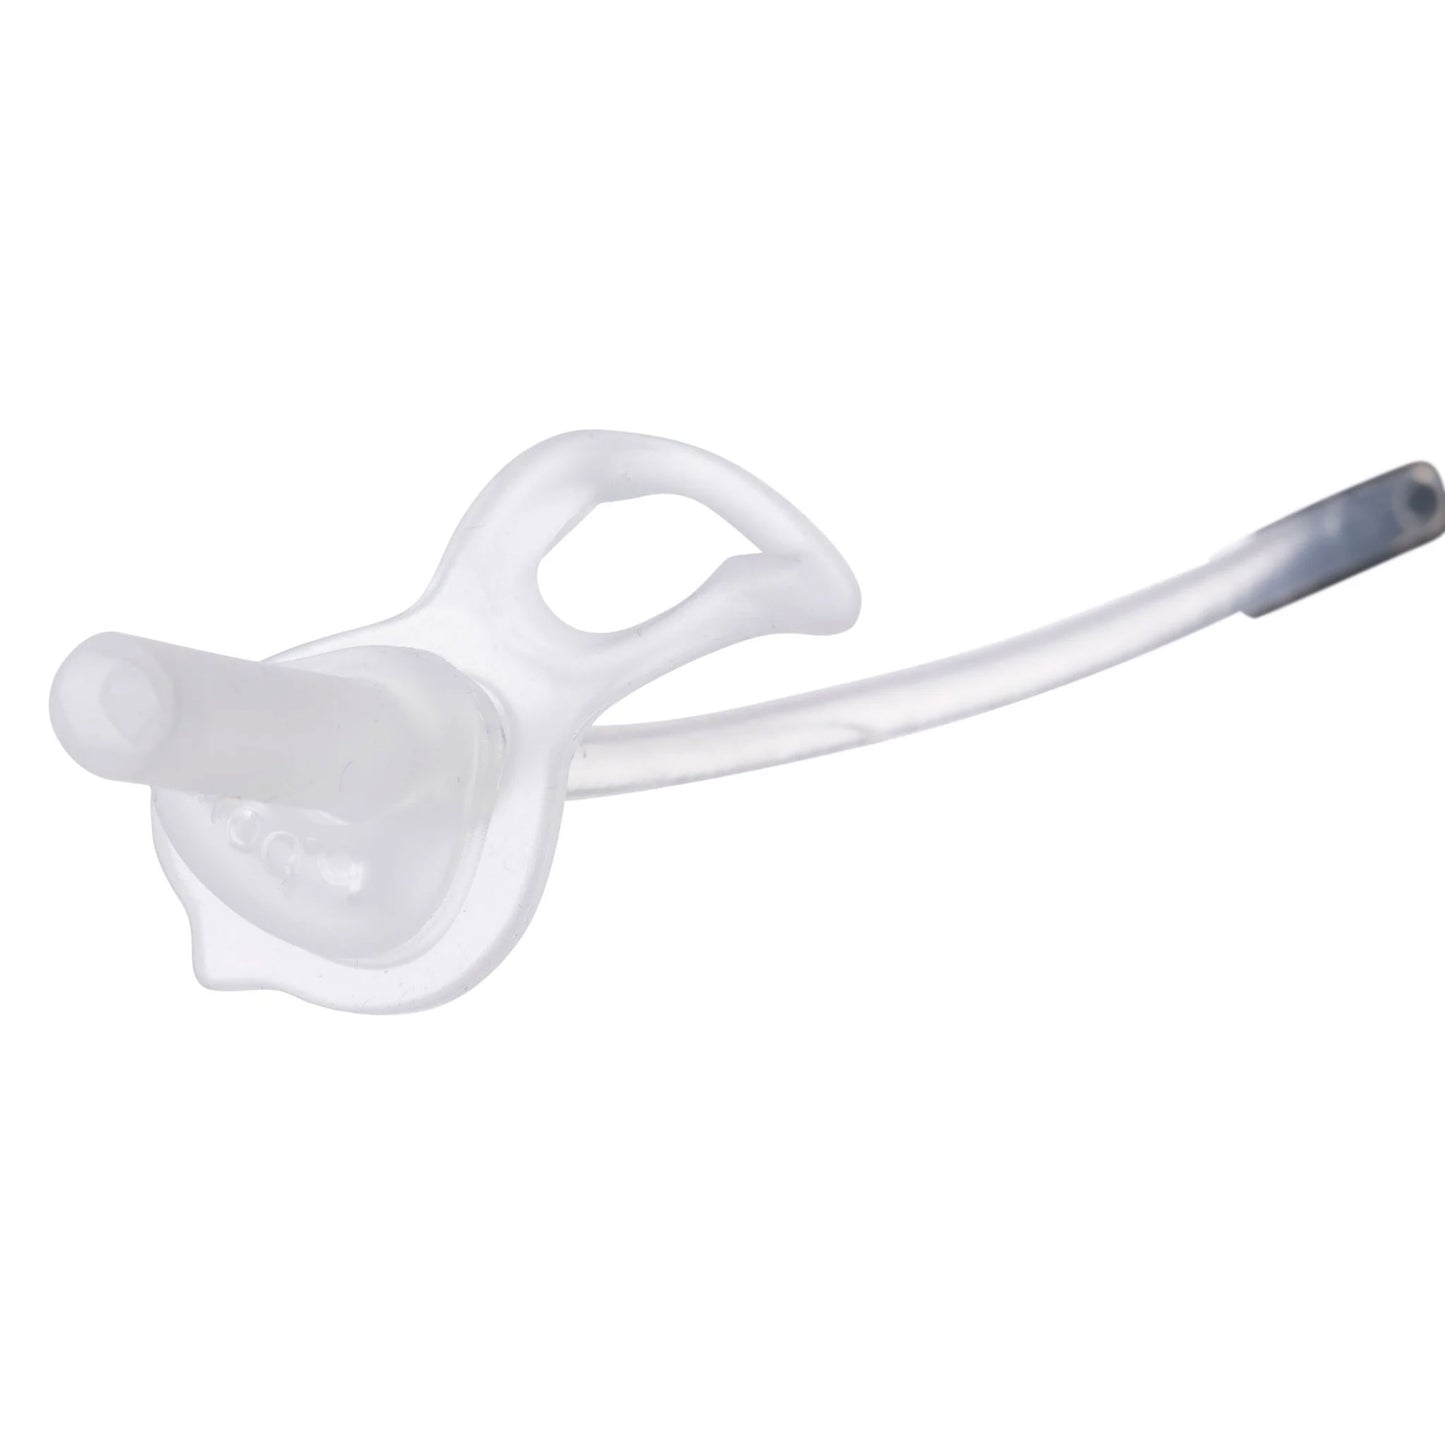 b.box Sippy Cup Replacement Straw & Cleaner